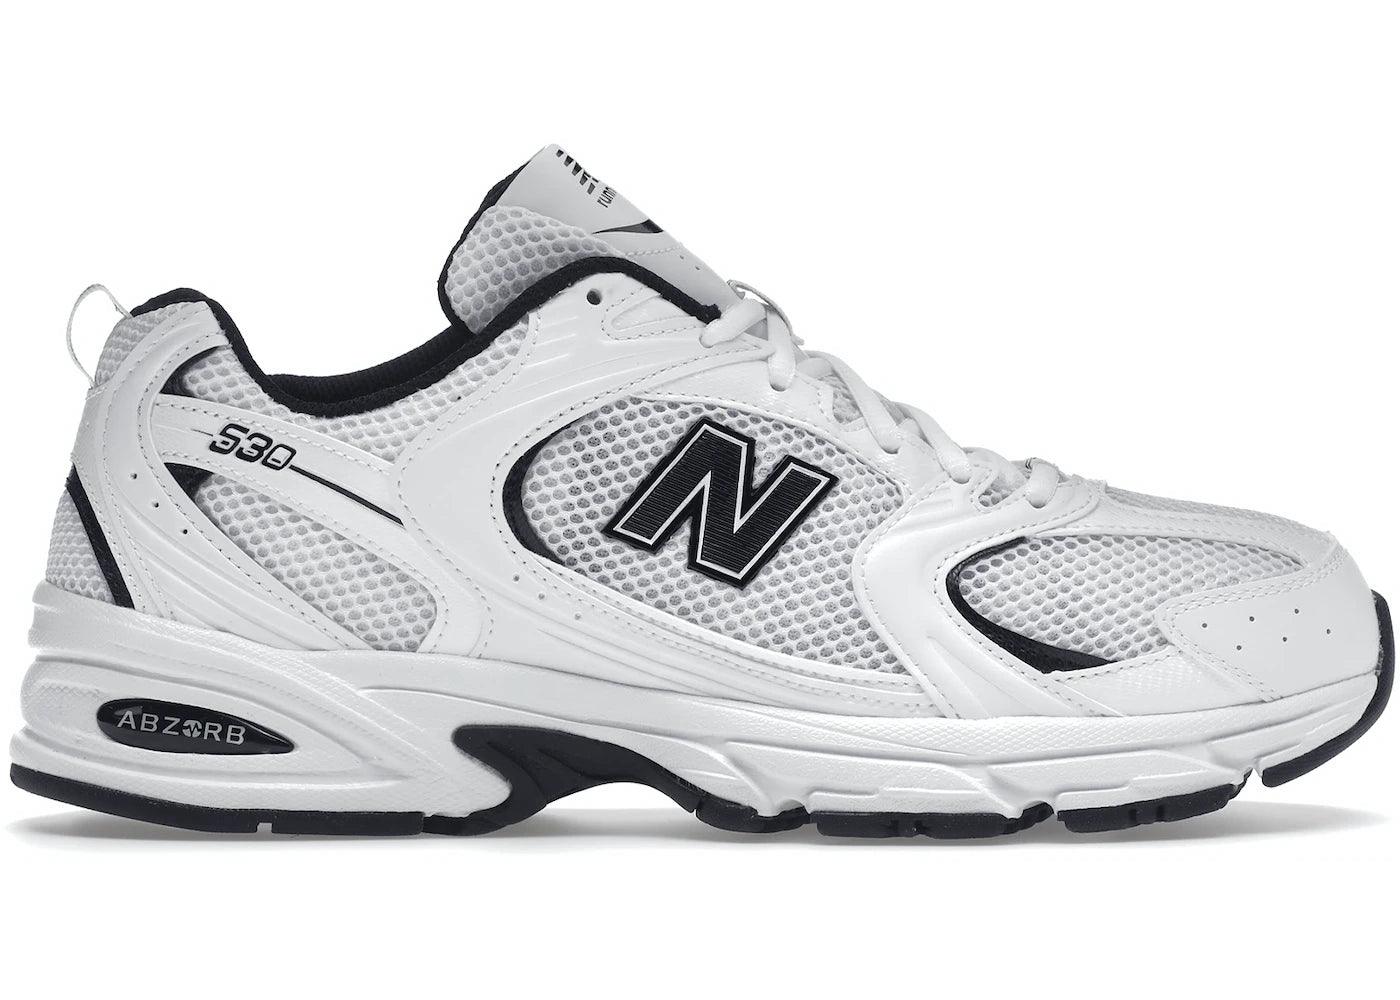 New Balance 530 White And Black - HIDEOUT